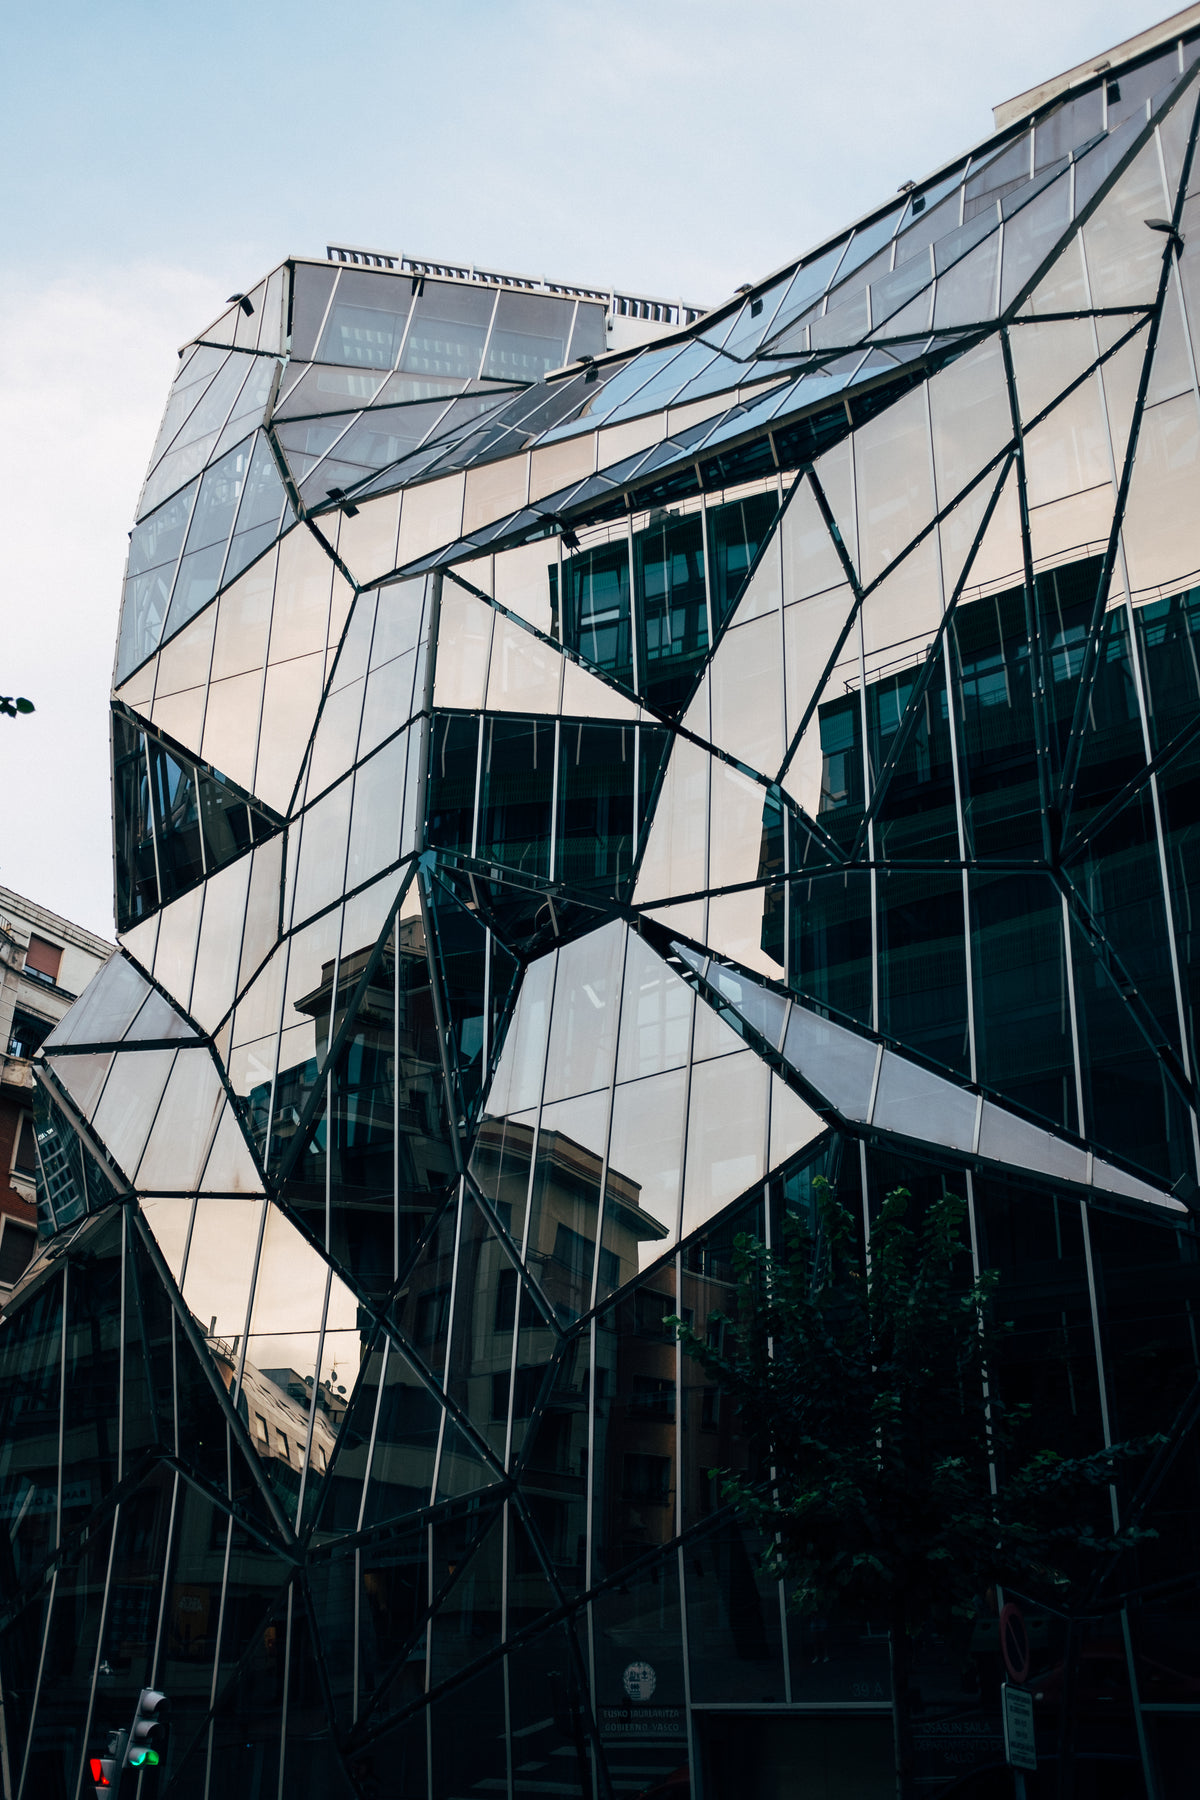 the geometric jutting shapes of a mirrored urban facade